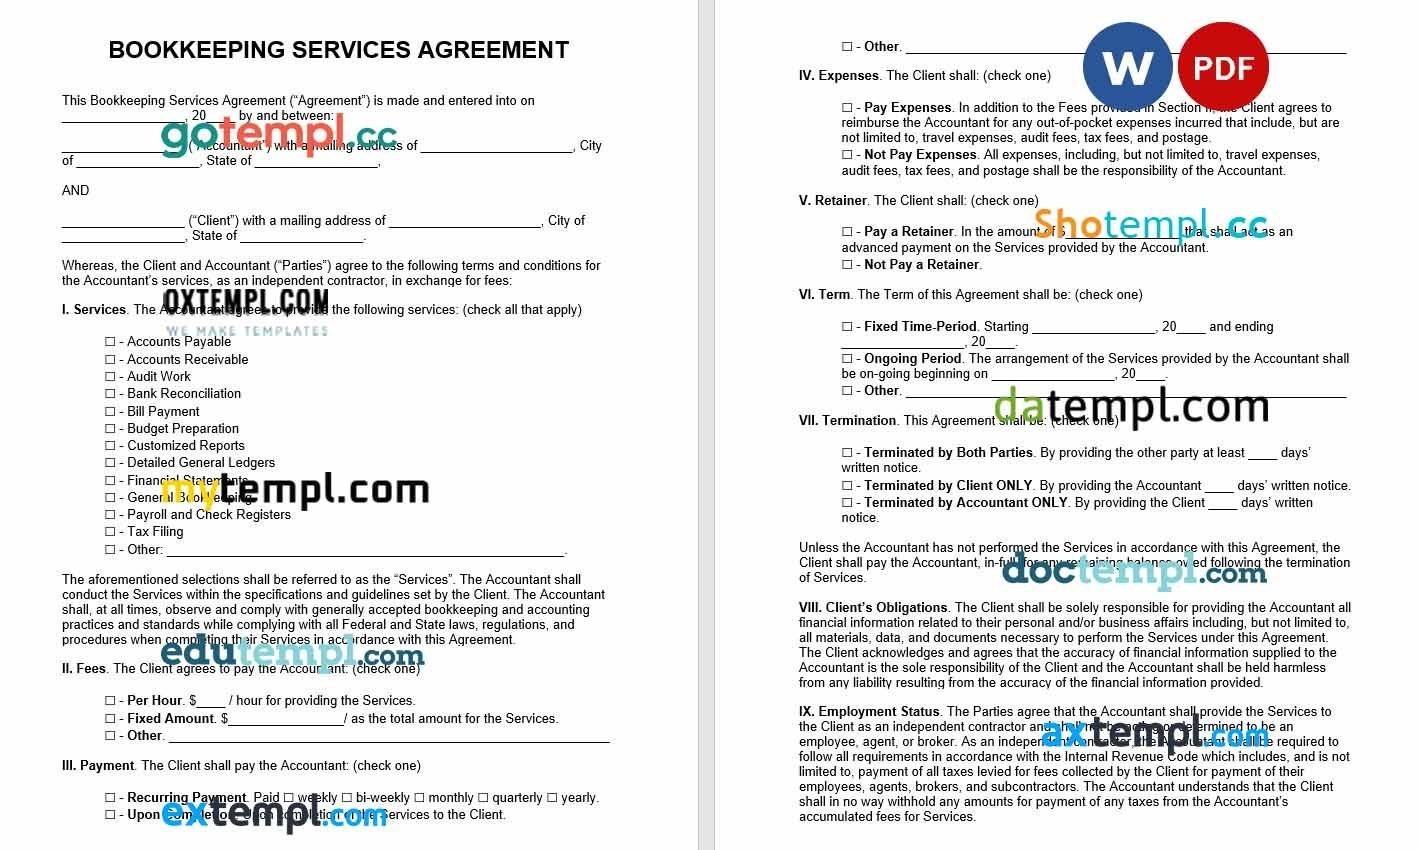 Bookkeeping Services Agreement Word example, fully editable